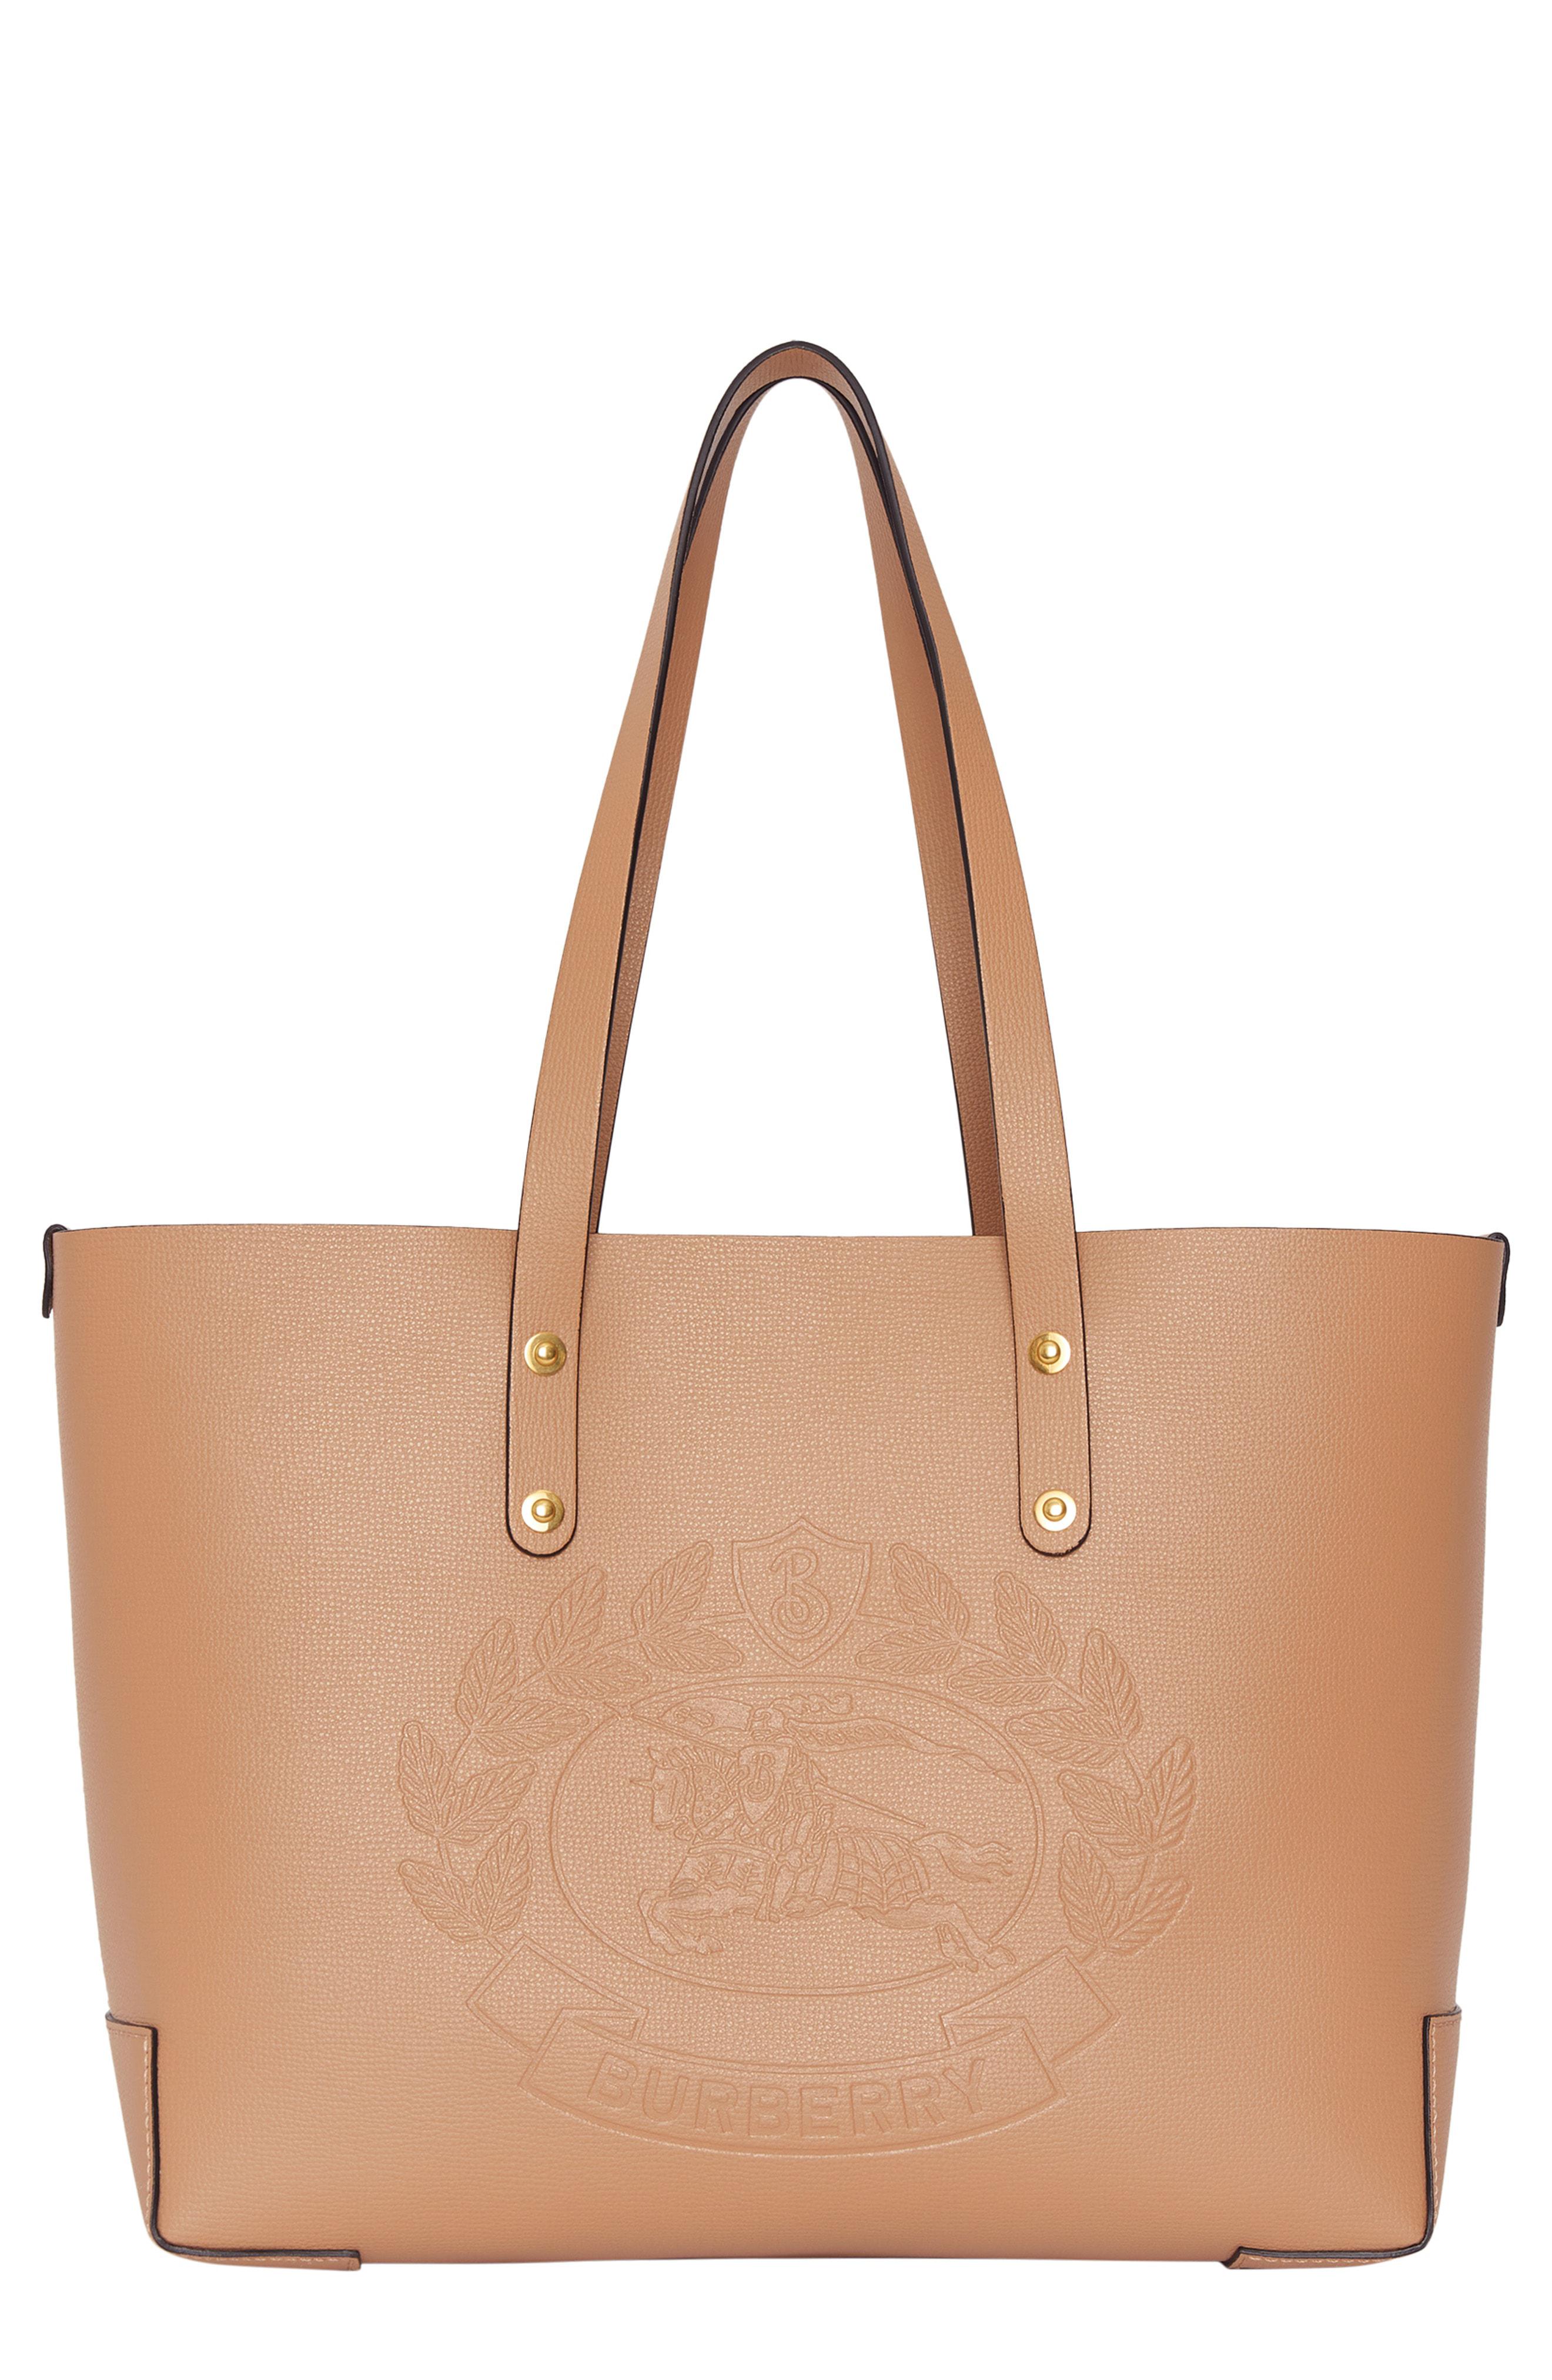 burberry crest tote Promotions